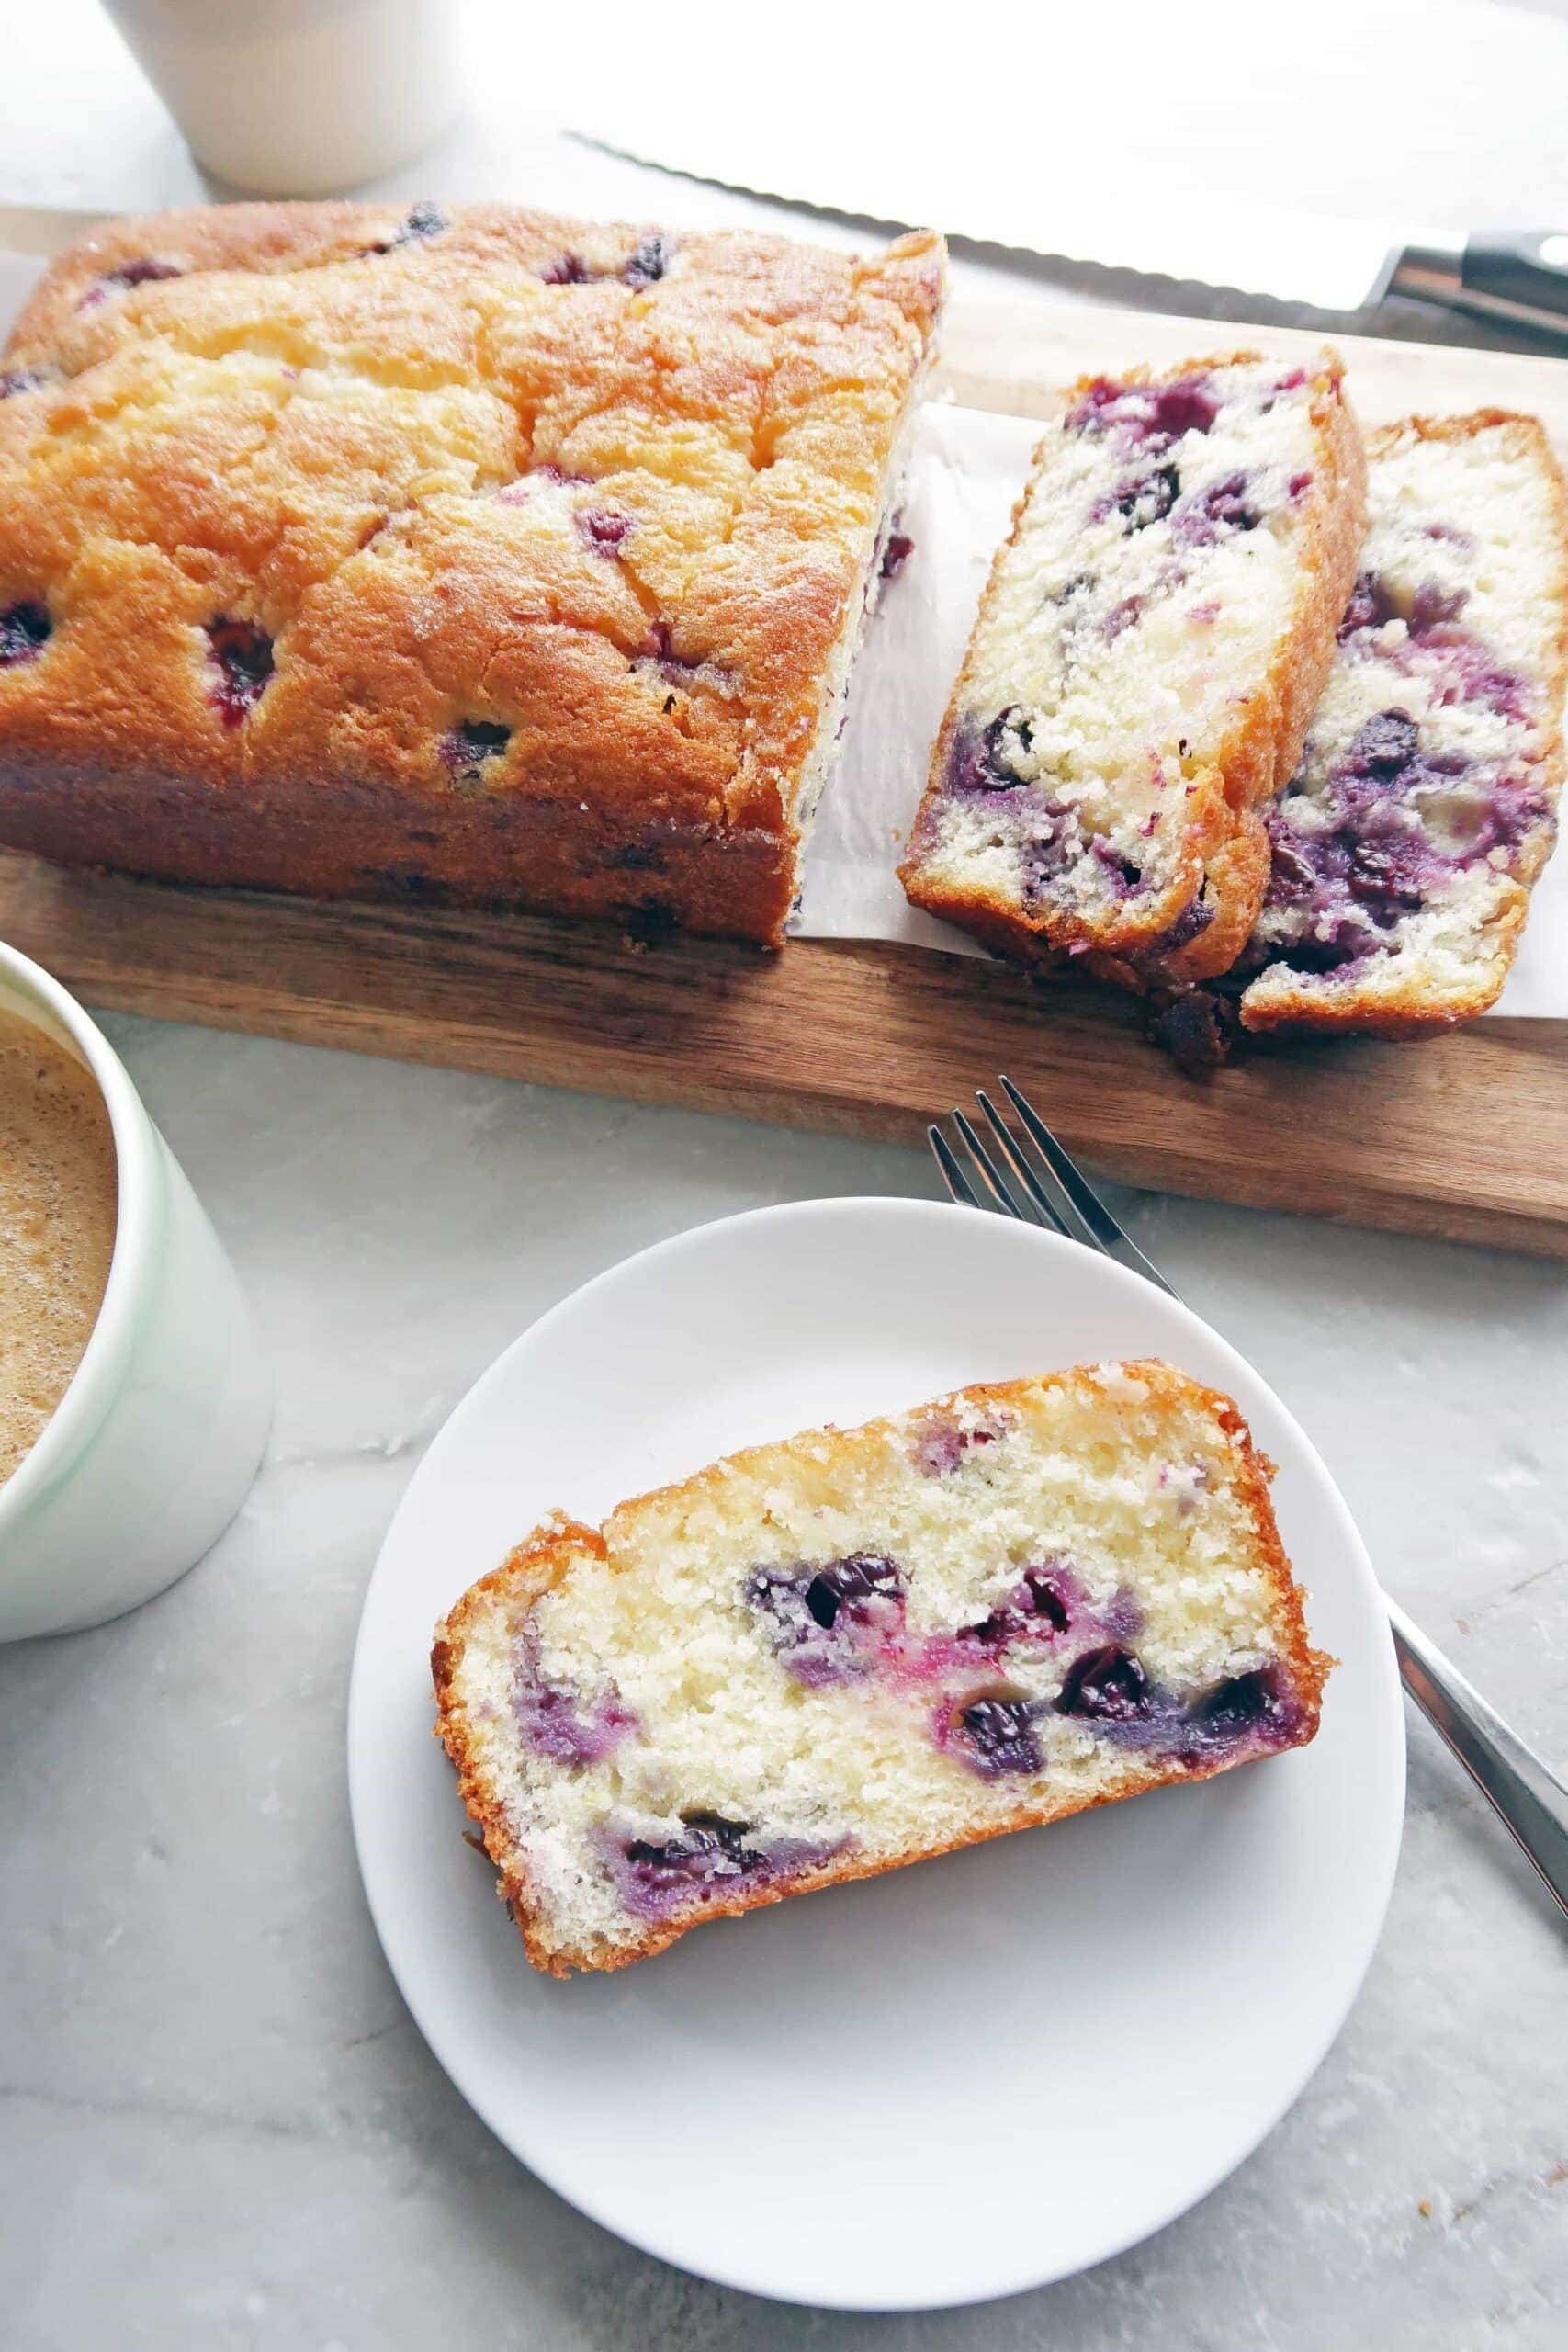 Lemon Blueberry Cake - Spend With Pennies